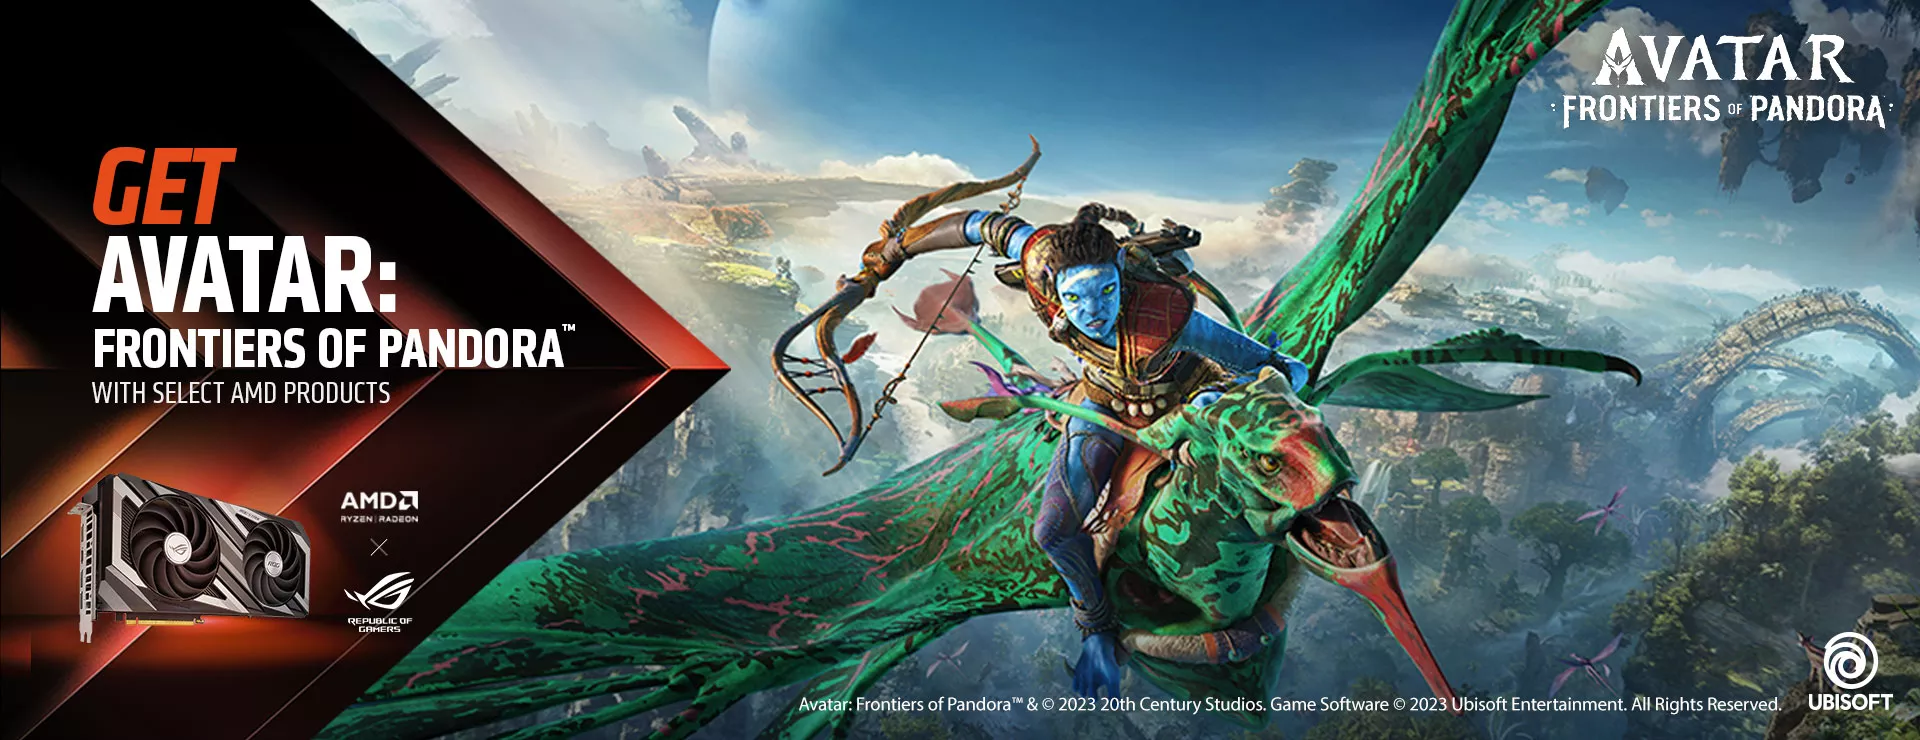 Avatar: Frontiers of Pandora game main theme image with ROG Strix Radeon graphics card